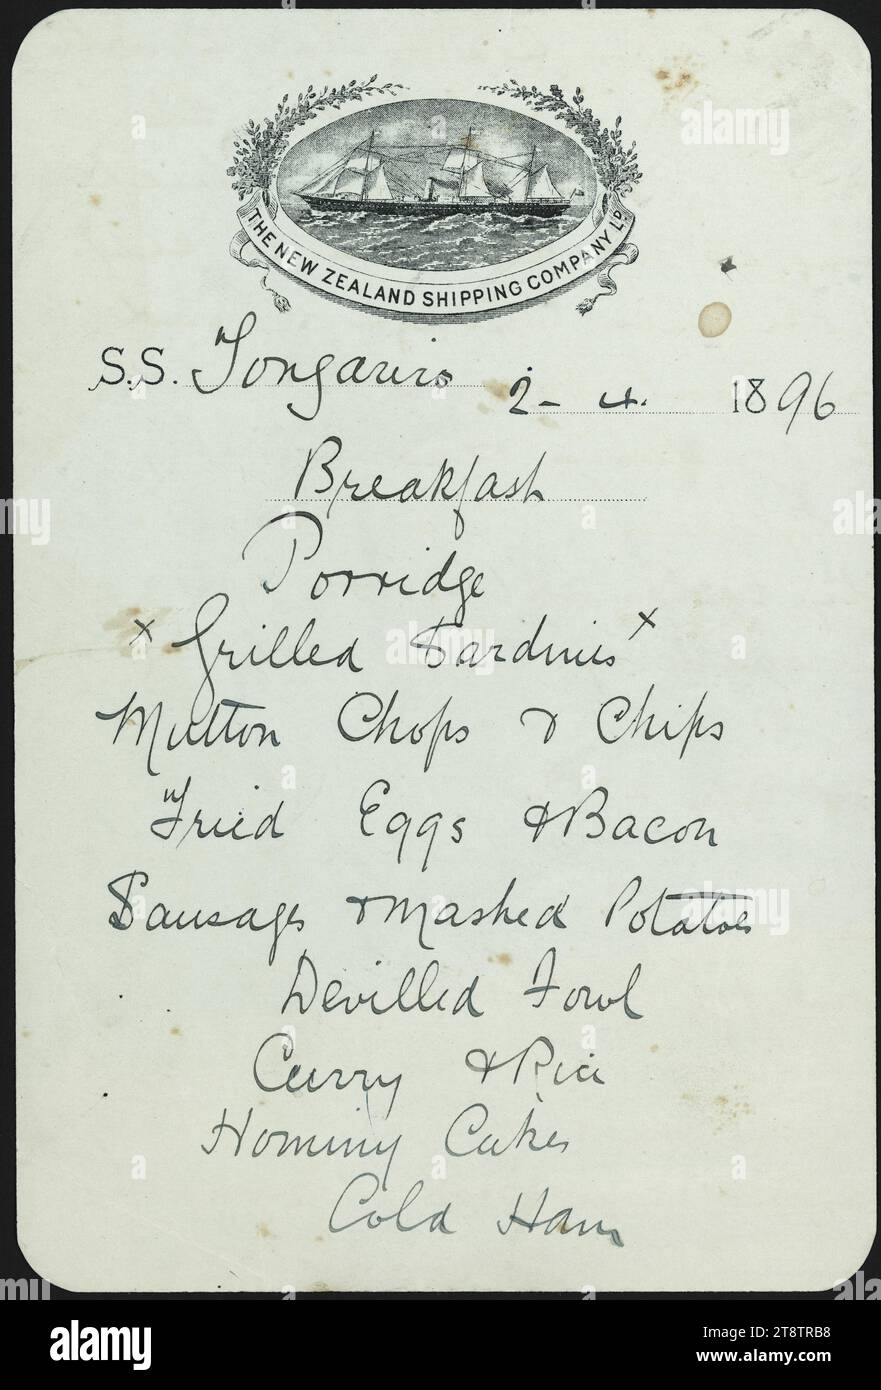 New Zealand Shipping Company: S.S. Tongariro. Breakfast menu. 2.4.1896, Menu lists porridge, grilled sardines, mutton chops & chips, fried eggs & bacon, sausages & mashed potatoes, devilled fowl, curry & rice, hominy cakes, and cold ham. At the top is a small portrait of a steam and sailing ship in an oval inset Stock Photo